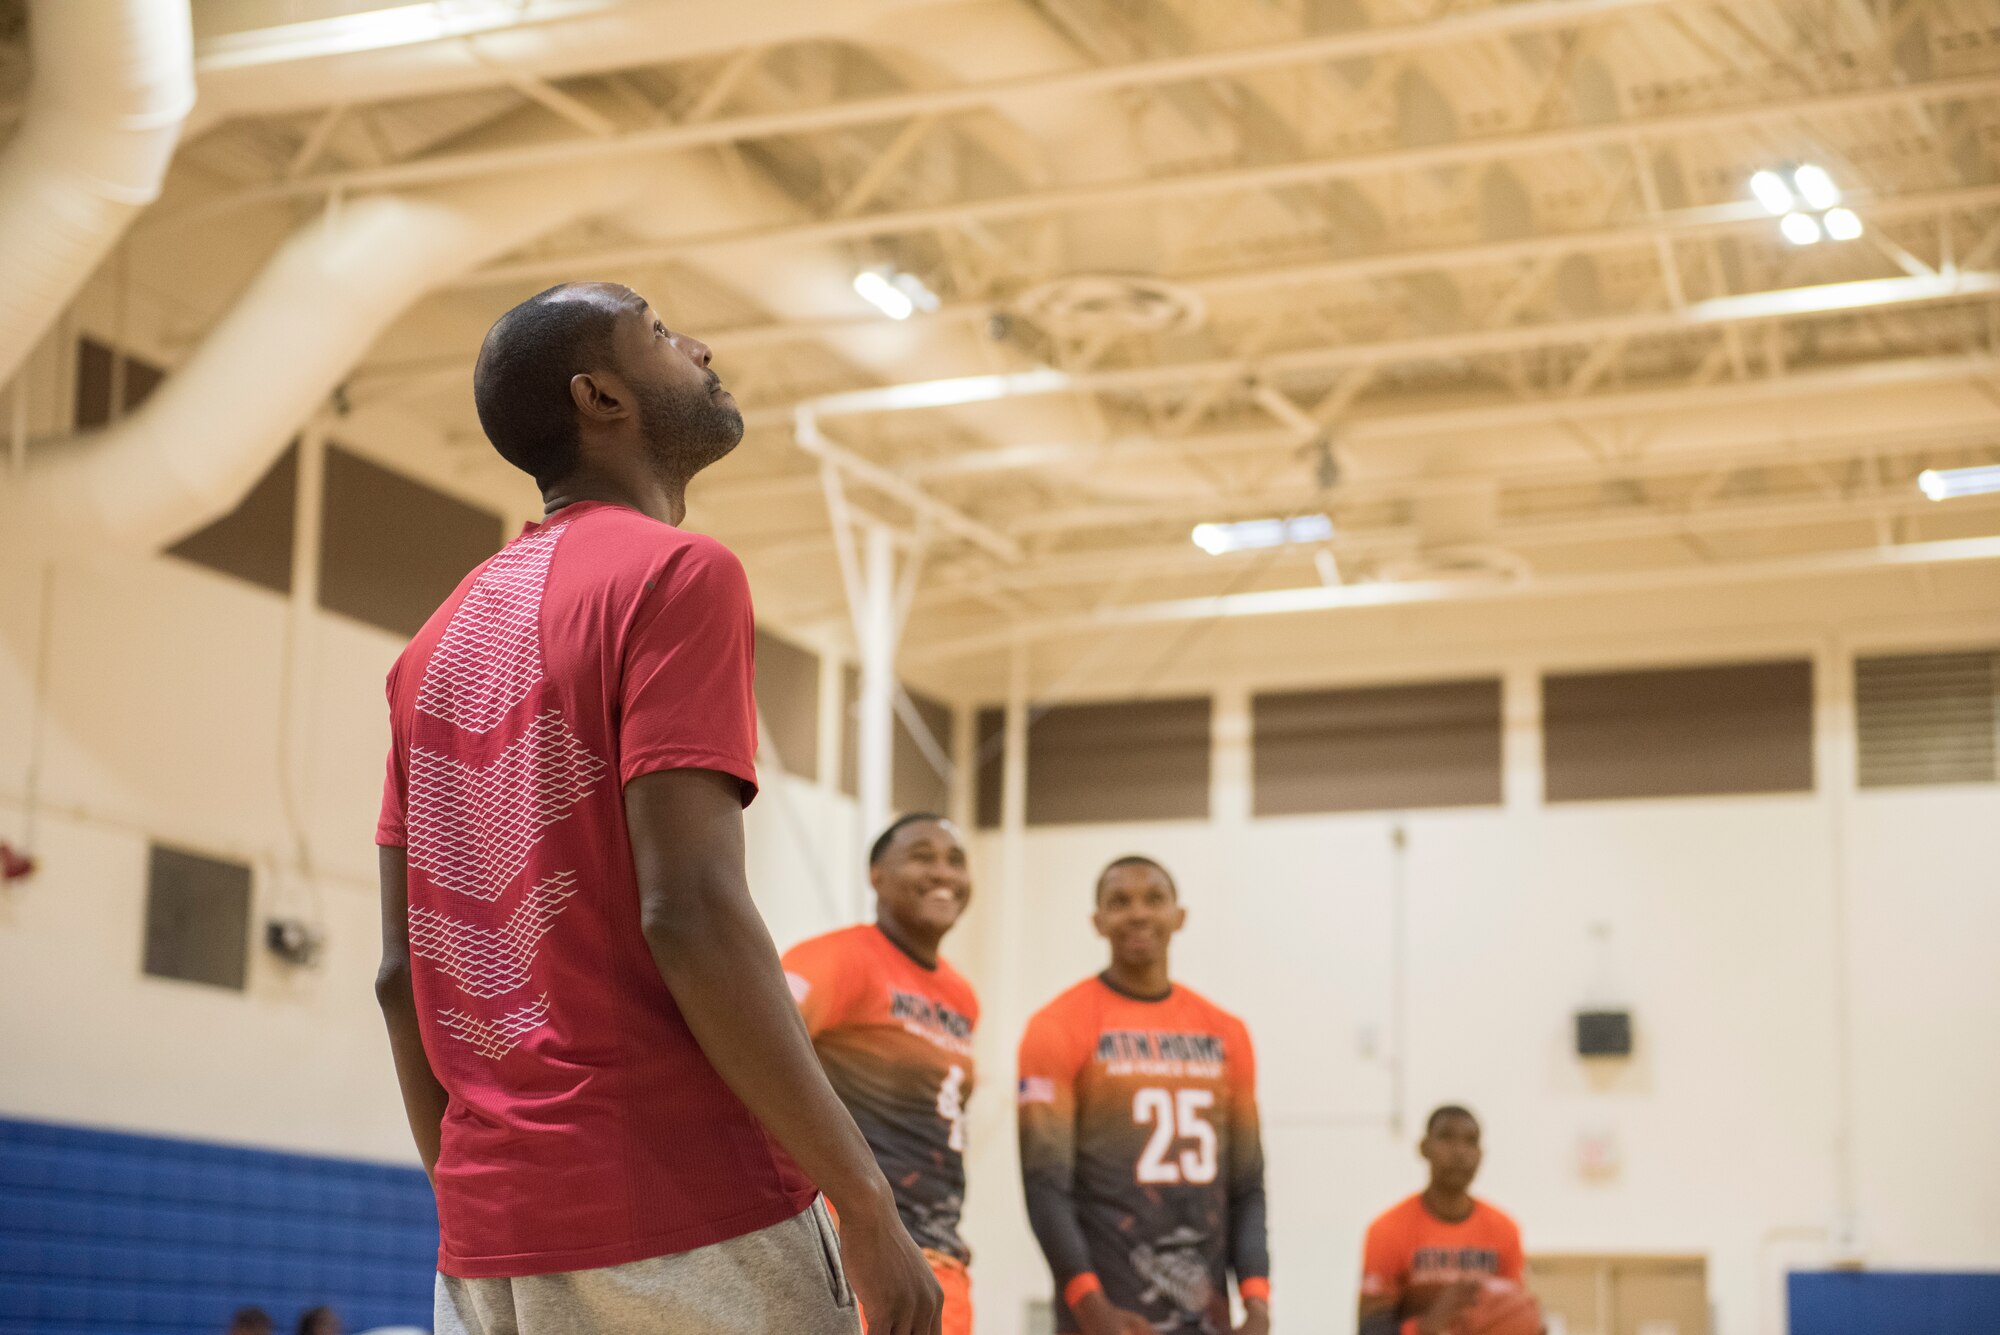 Airman 1st Class Brandon Taylor, 366th Maintenance Squadron aerospace ground equipment range, supervises a basketball team while they practice at a game, Aug. 25, 2019, at Mountain Home Air Force Base, Idaho. Taylor coached the Gunfighters during a game where they faced off with a team made of college players and players who've participated in the National Basketball Association's development league. (U.S. Air Force photo by Senior Airman Tyrell Hall)